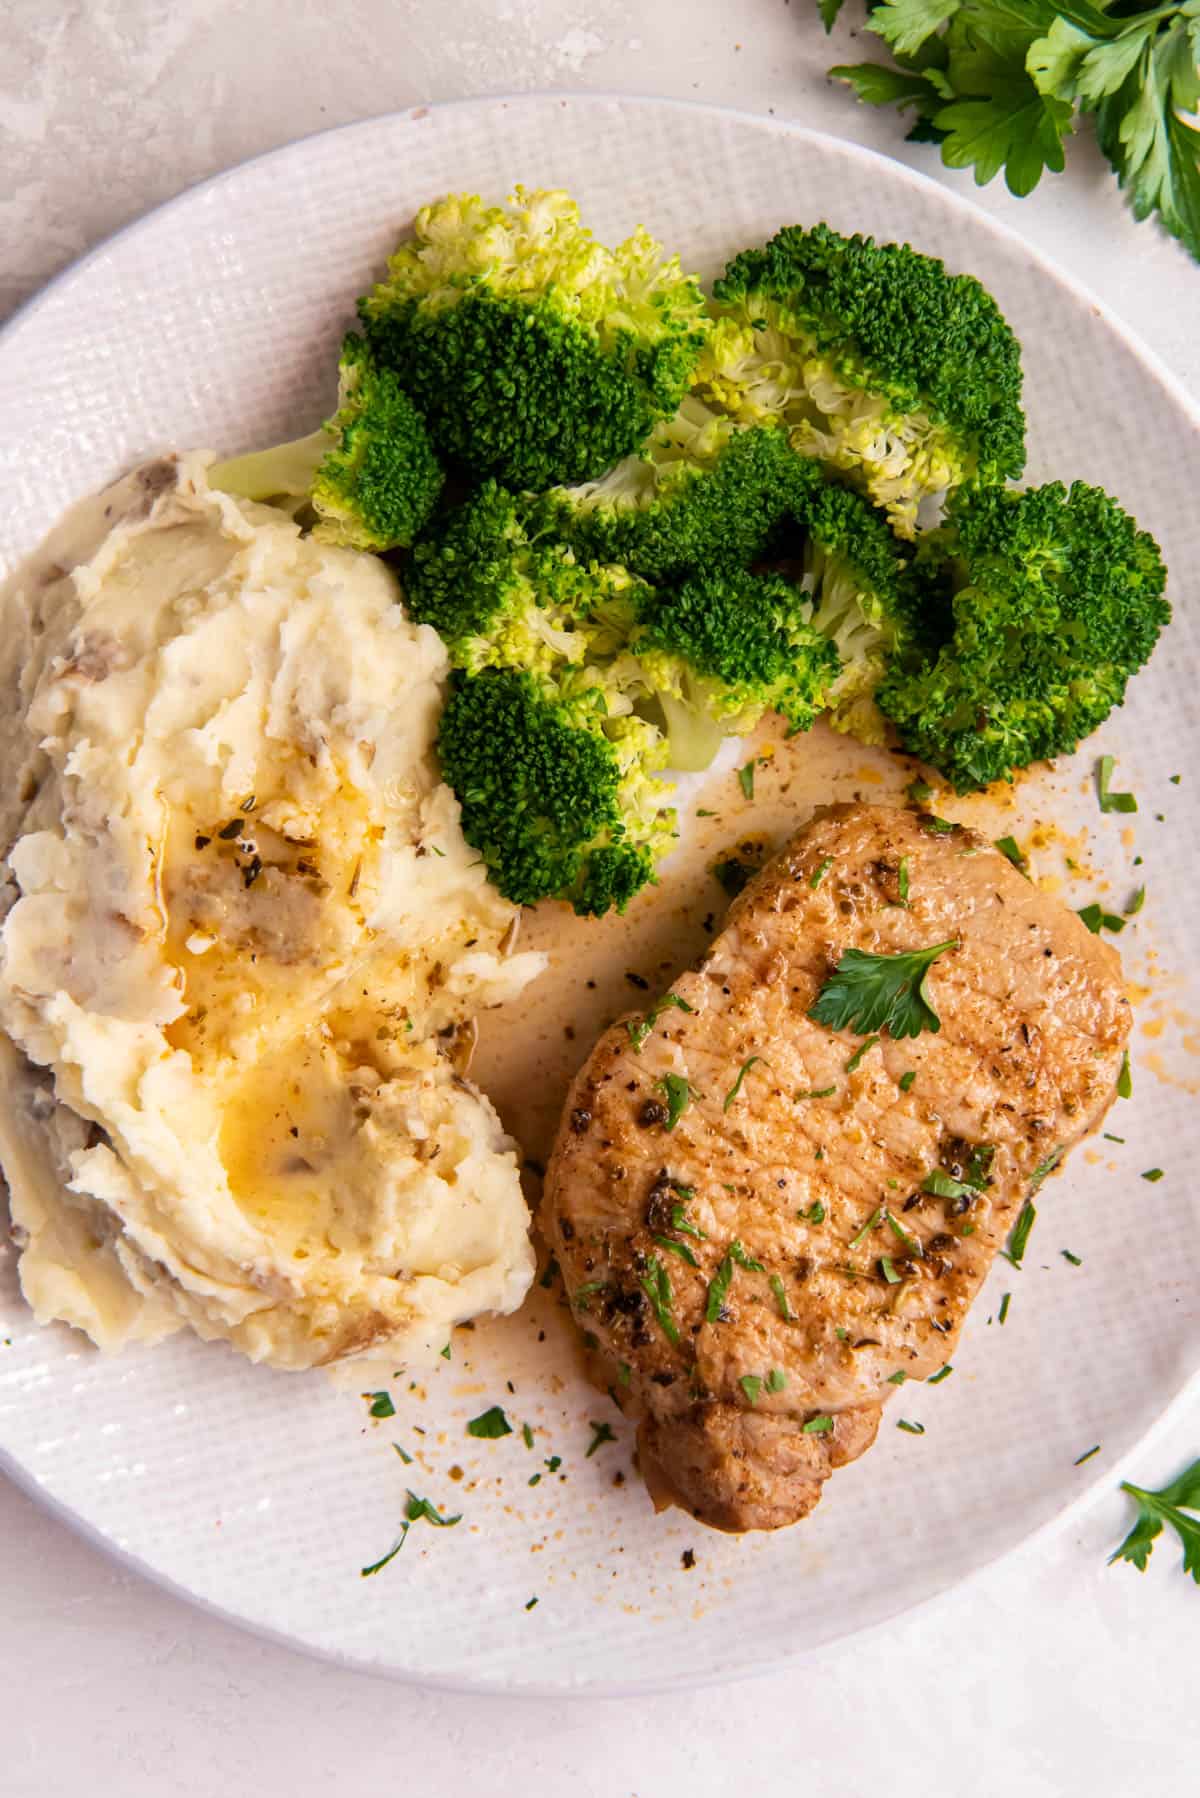 A white plate with a cooked boneless pork chop, steamed broccoli and mashed potatoes with gravy.